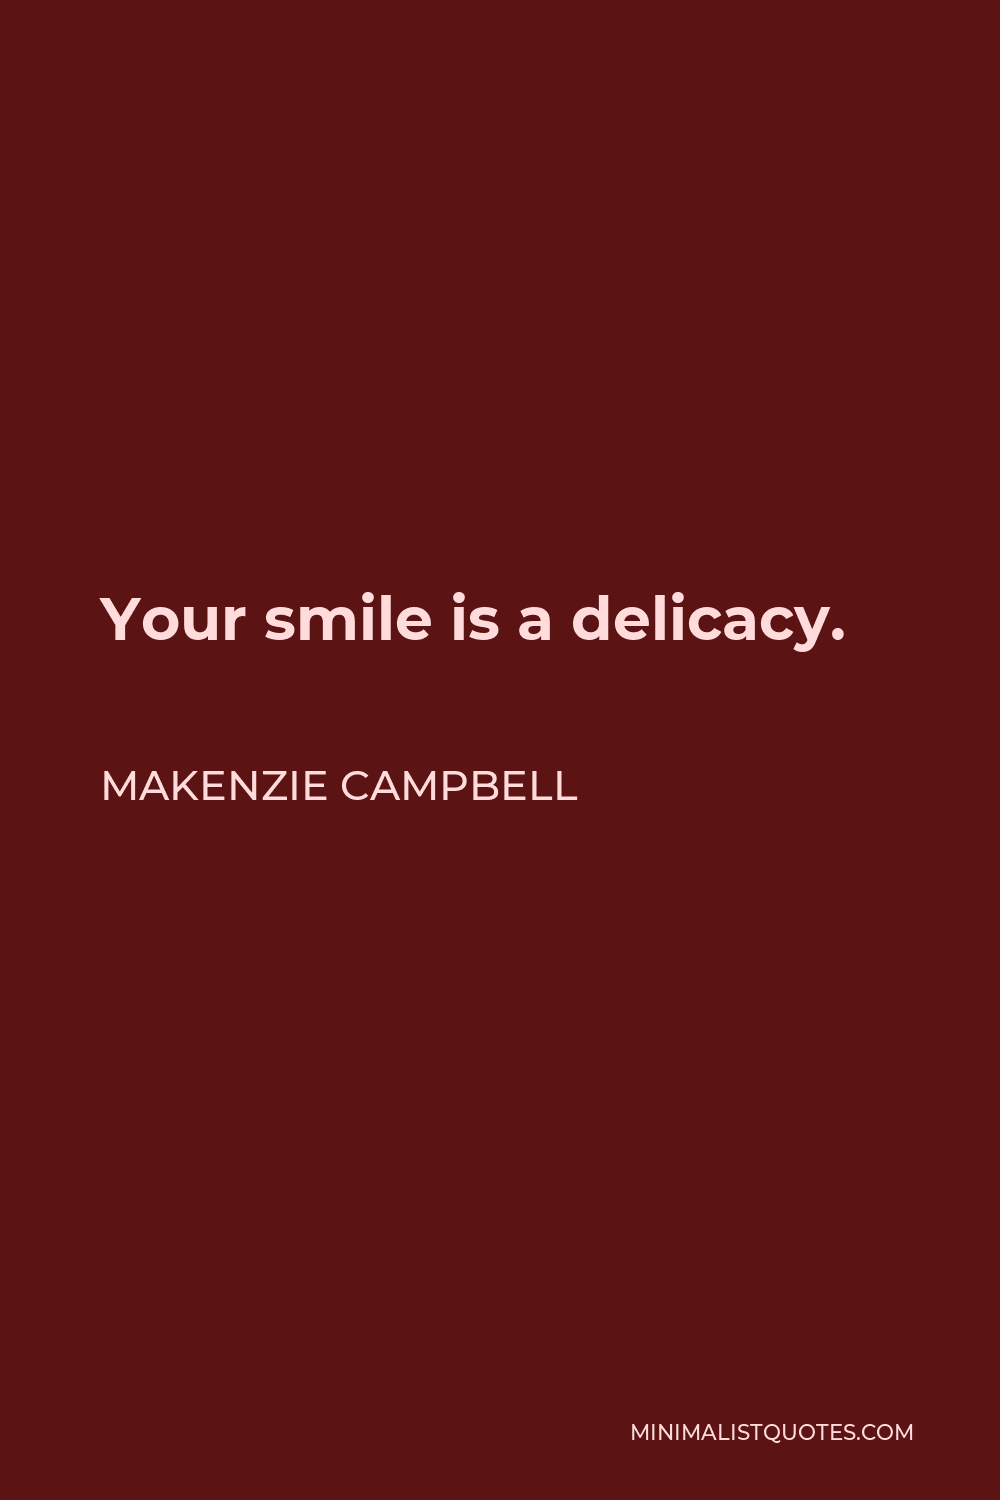 Makenzie Campbell Quote - Your smile is a delicacy.